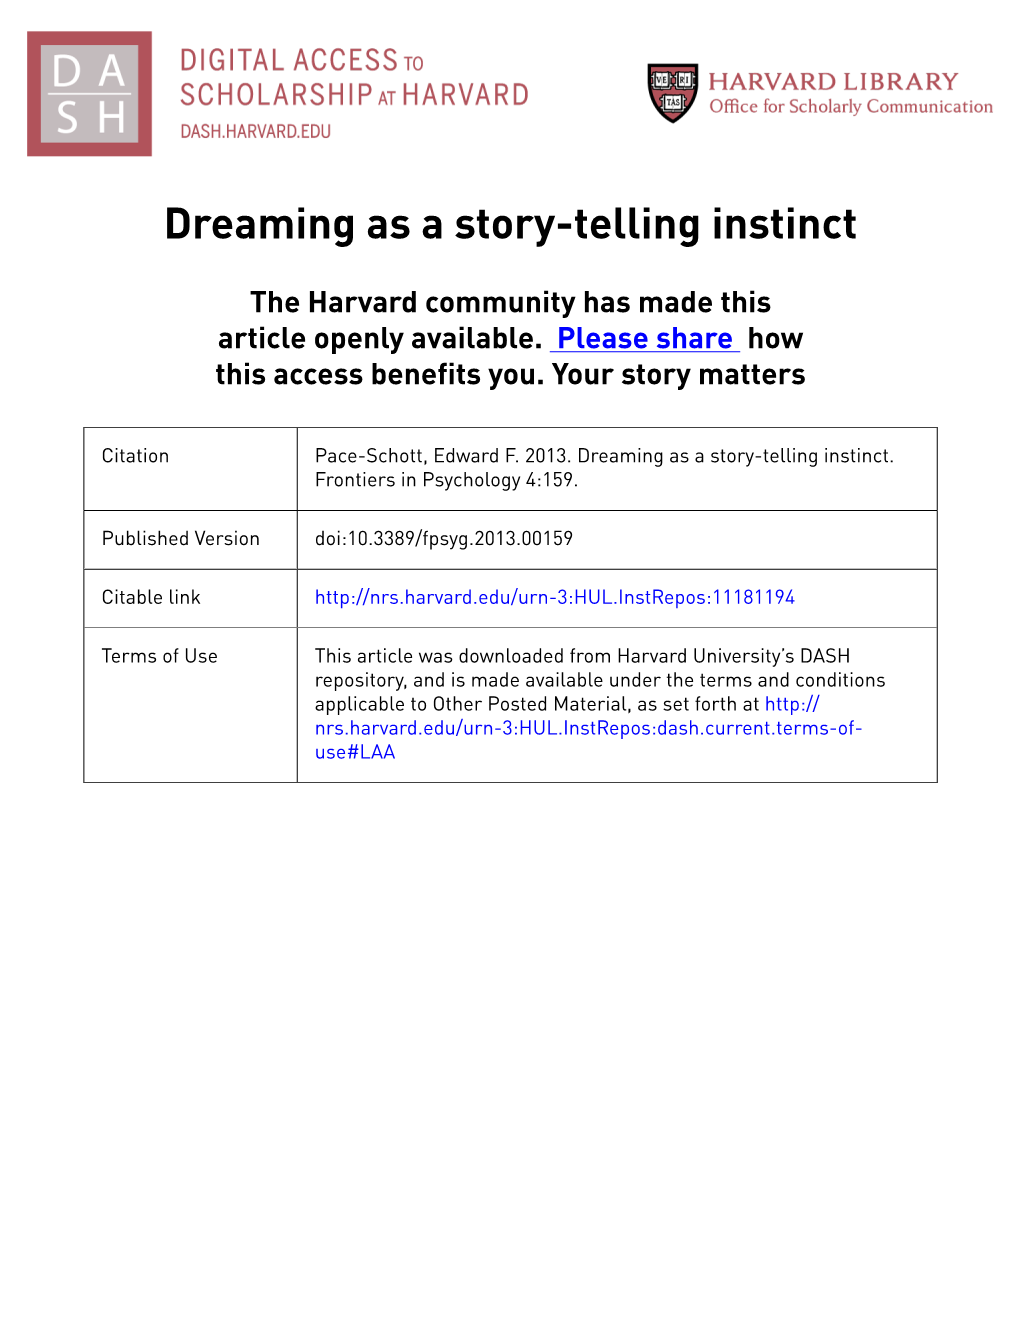 Dreaming As a Story-Telling Instinct